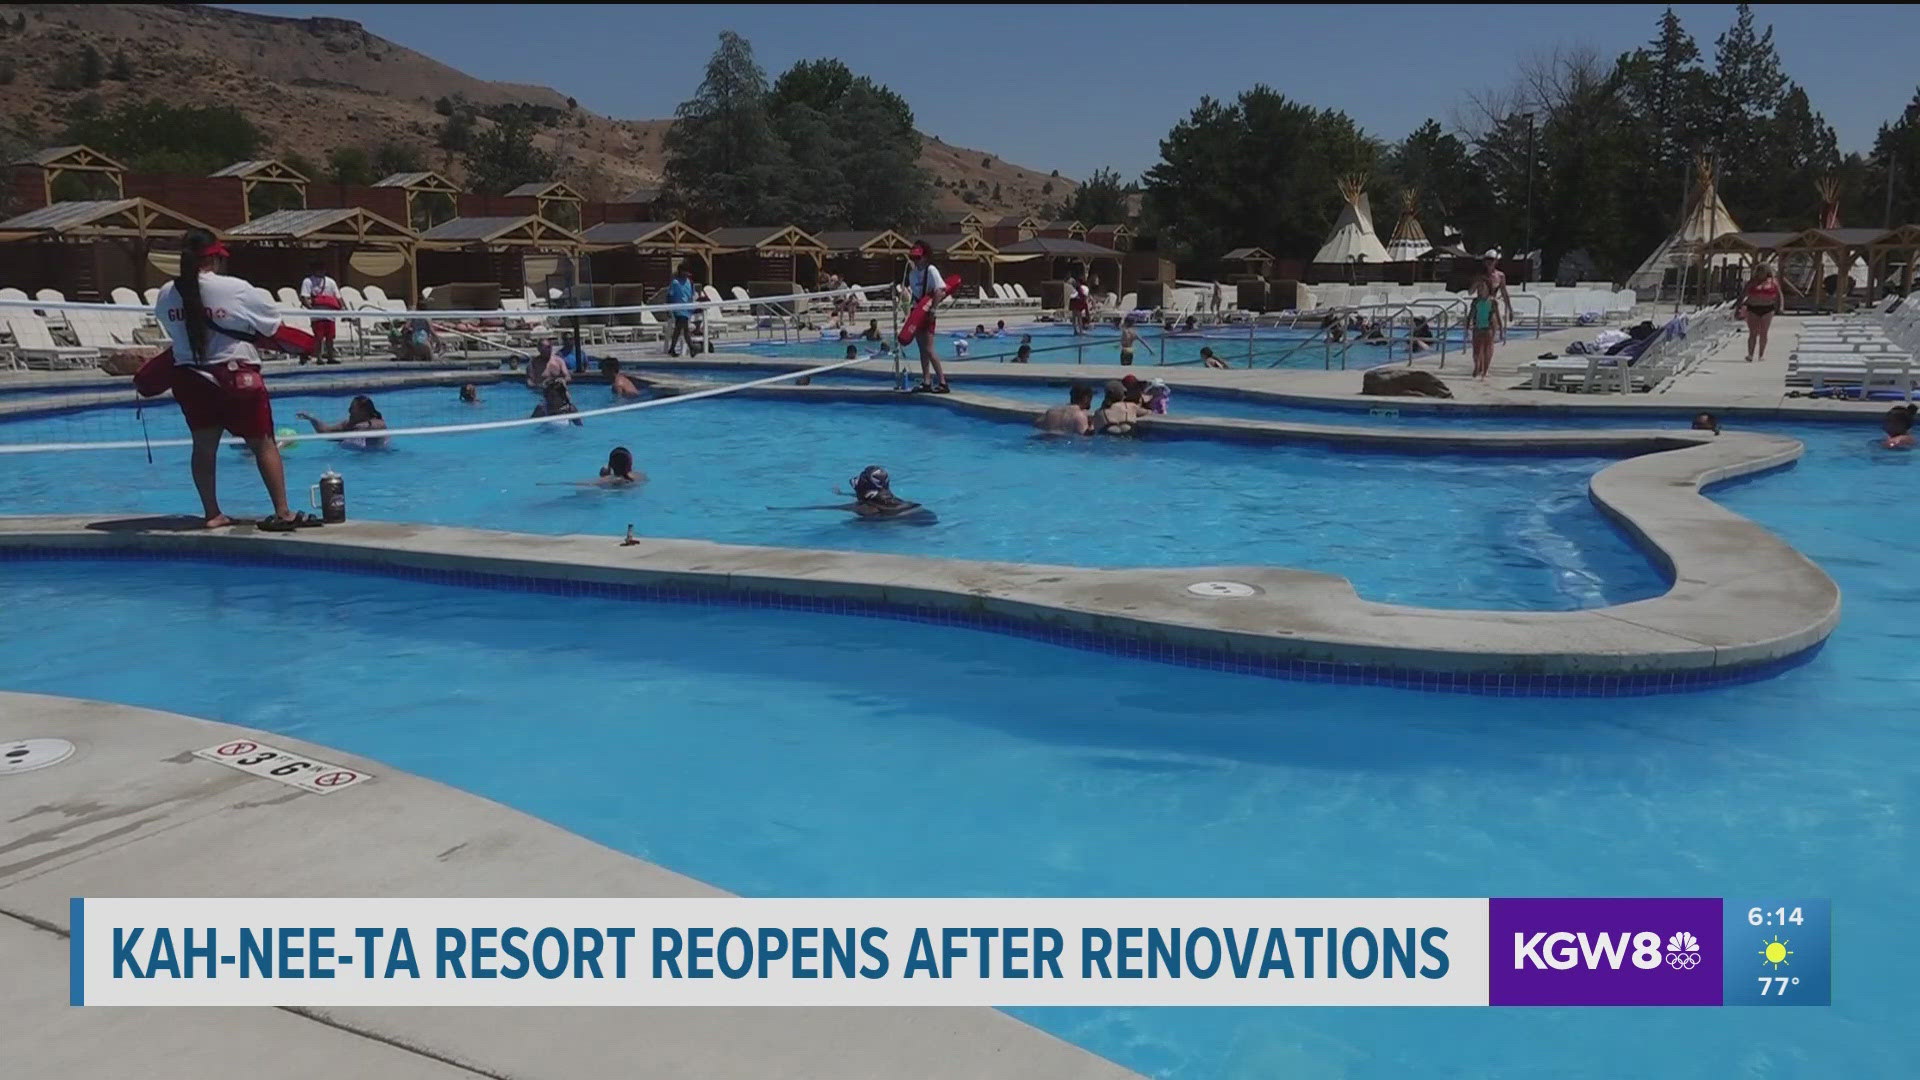 The central Oregon resort has renovated, expanded and now reopened after a six-year hiatus.